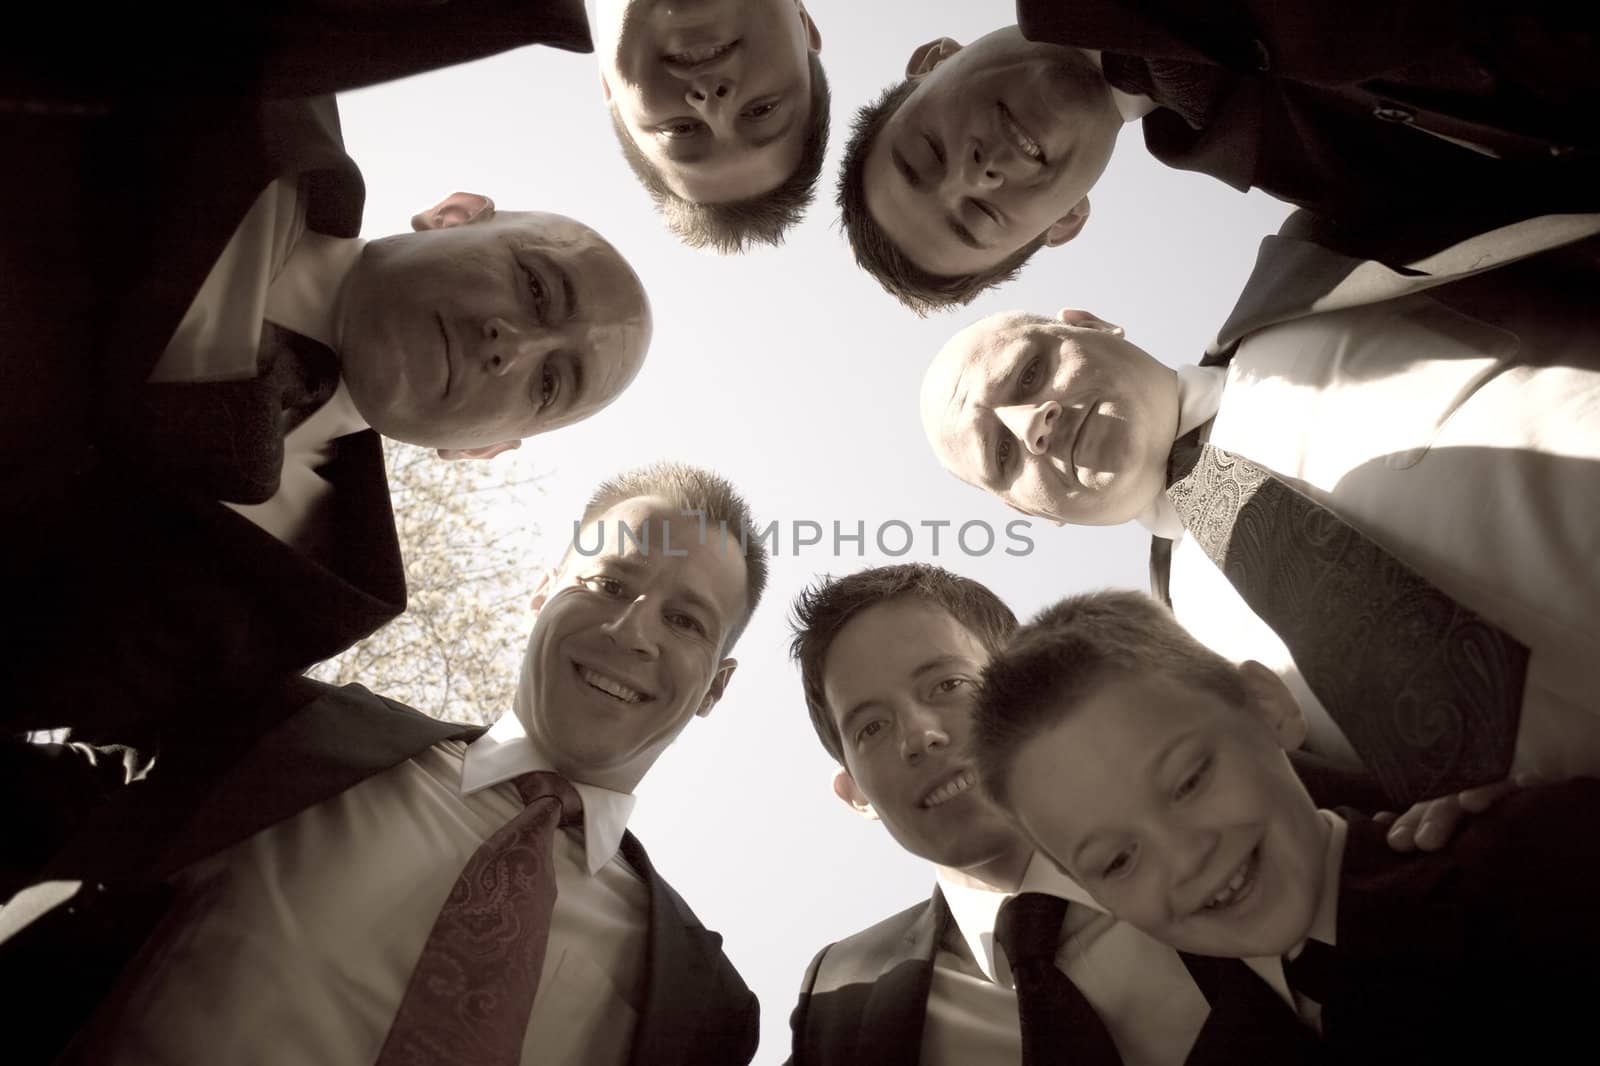 A groom and his groomsmen posing together in a huddle formation.